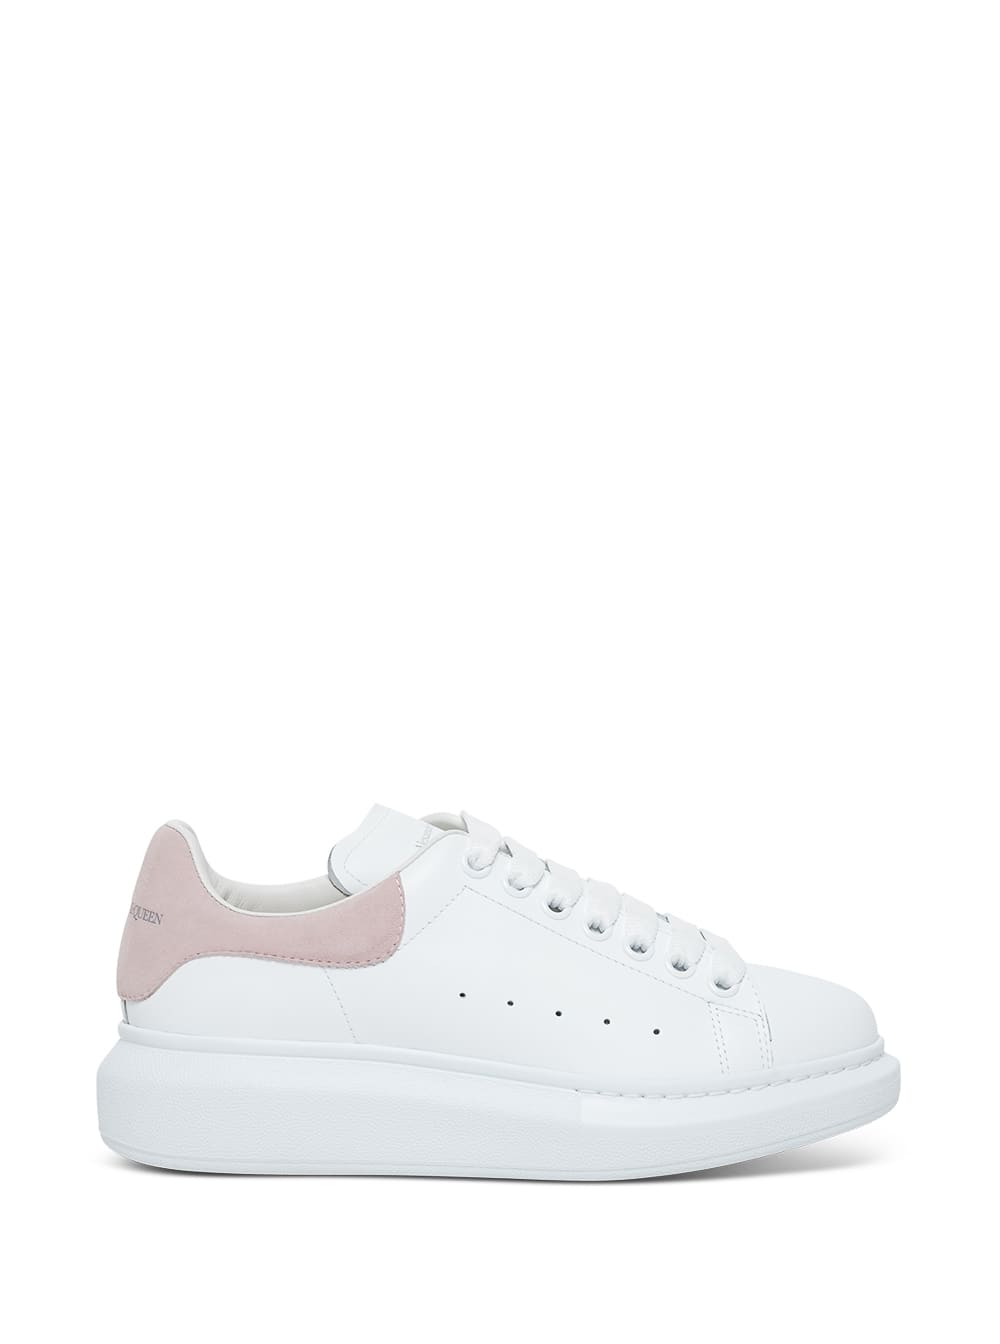 Alexander McQueen Leather Larry White Sneakers